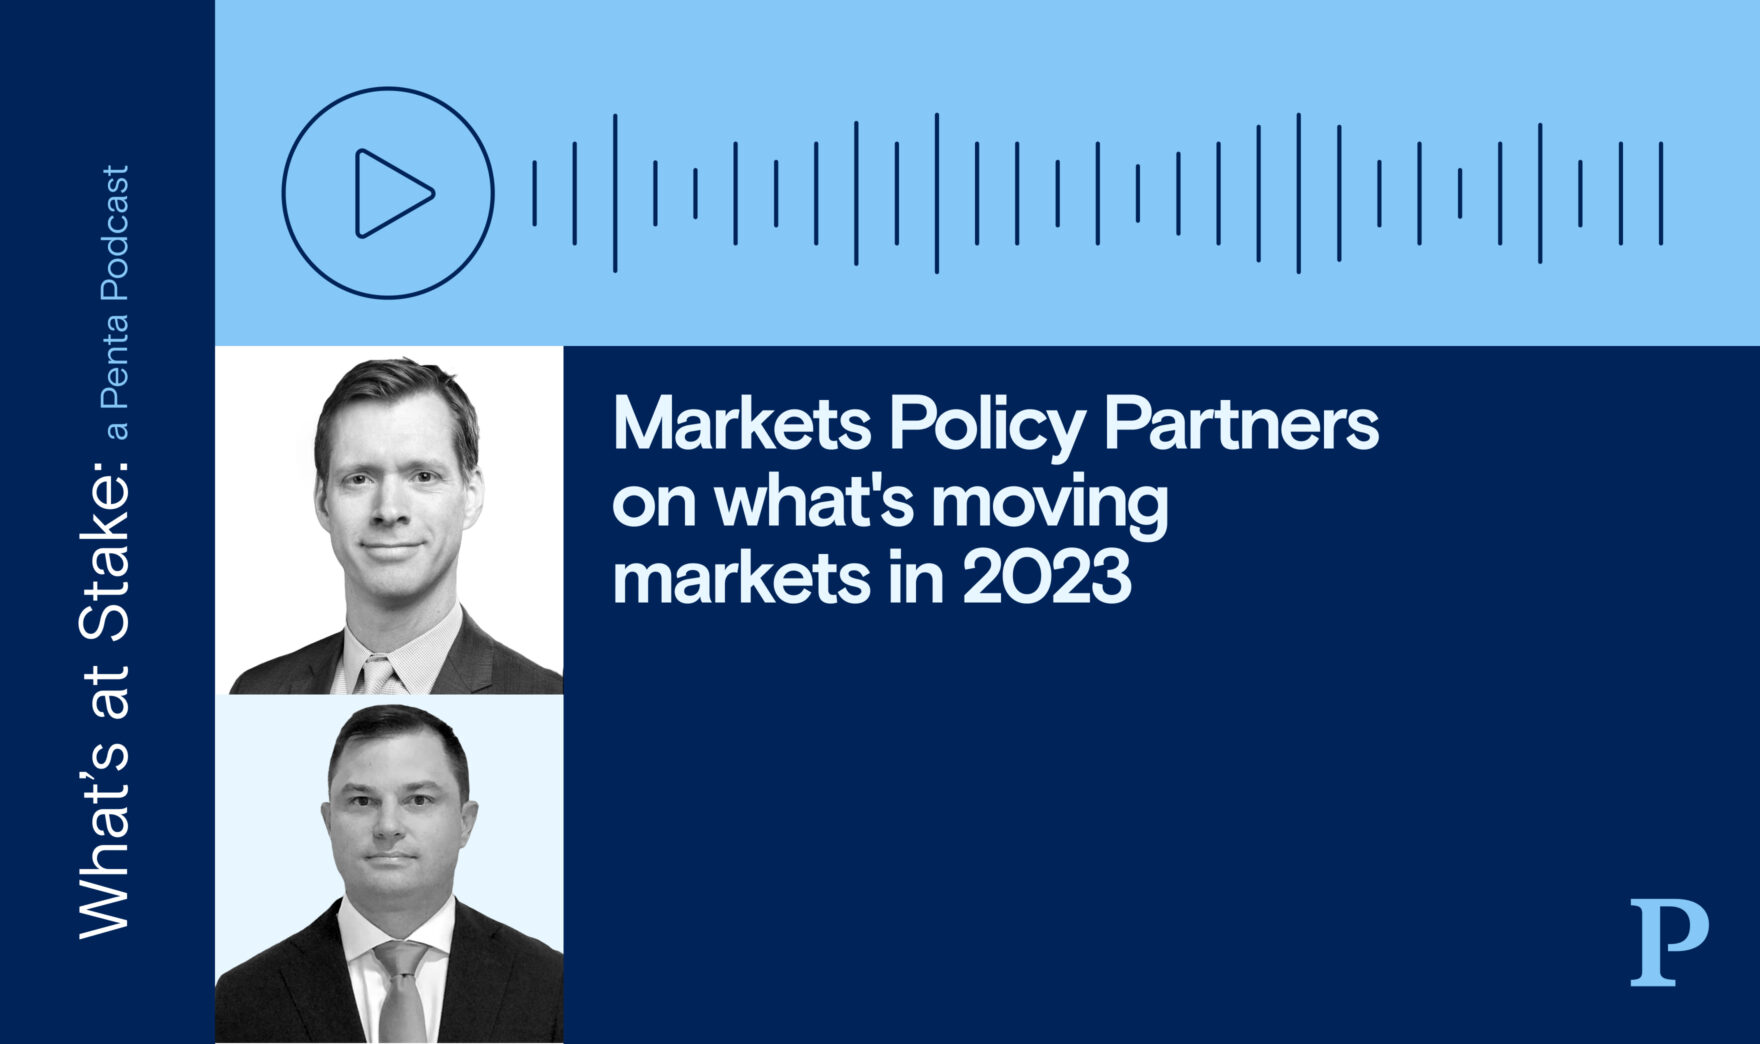 Markets Policy Partners on what’s moving markets in 2023